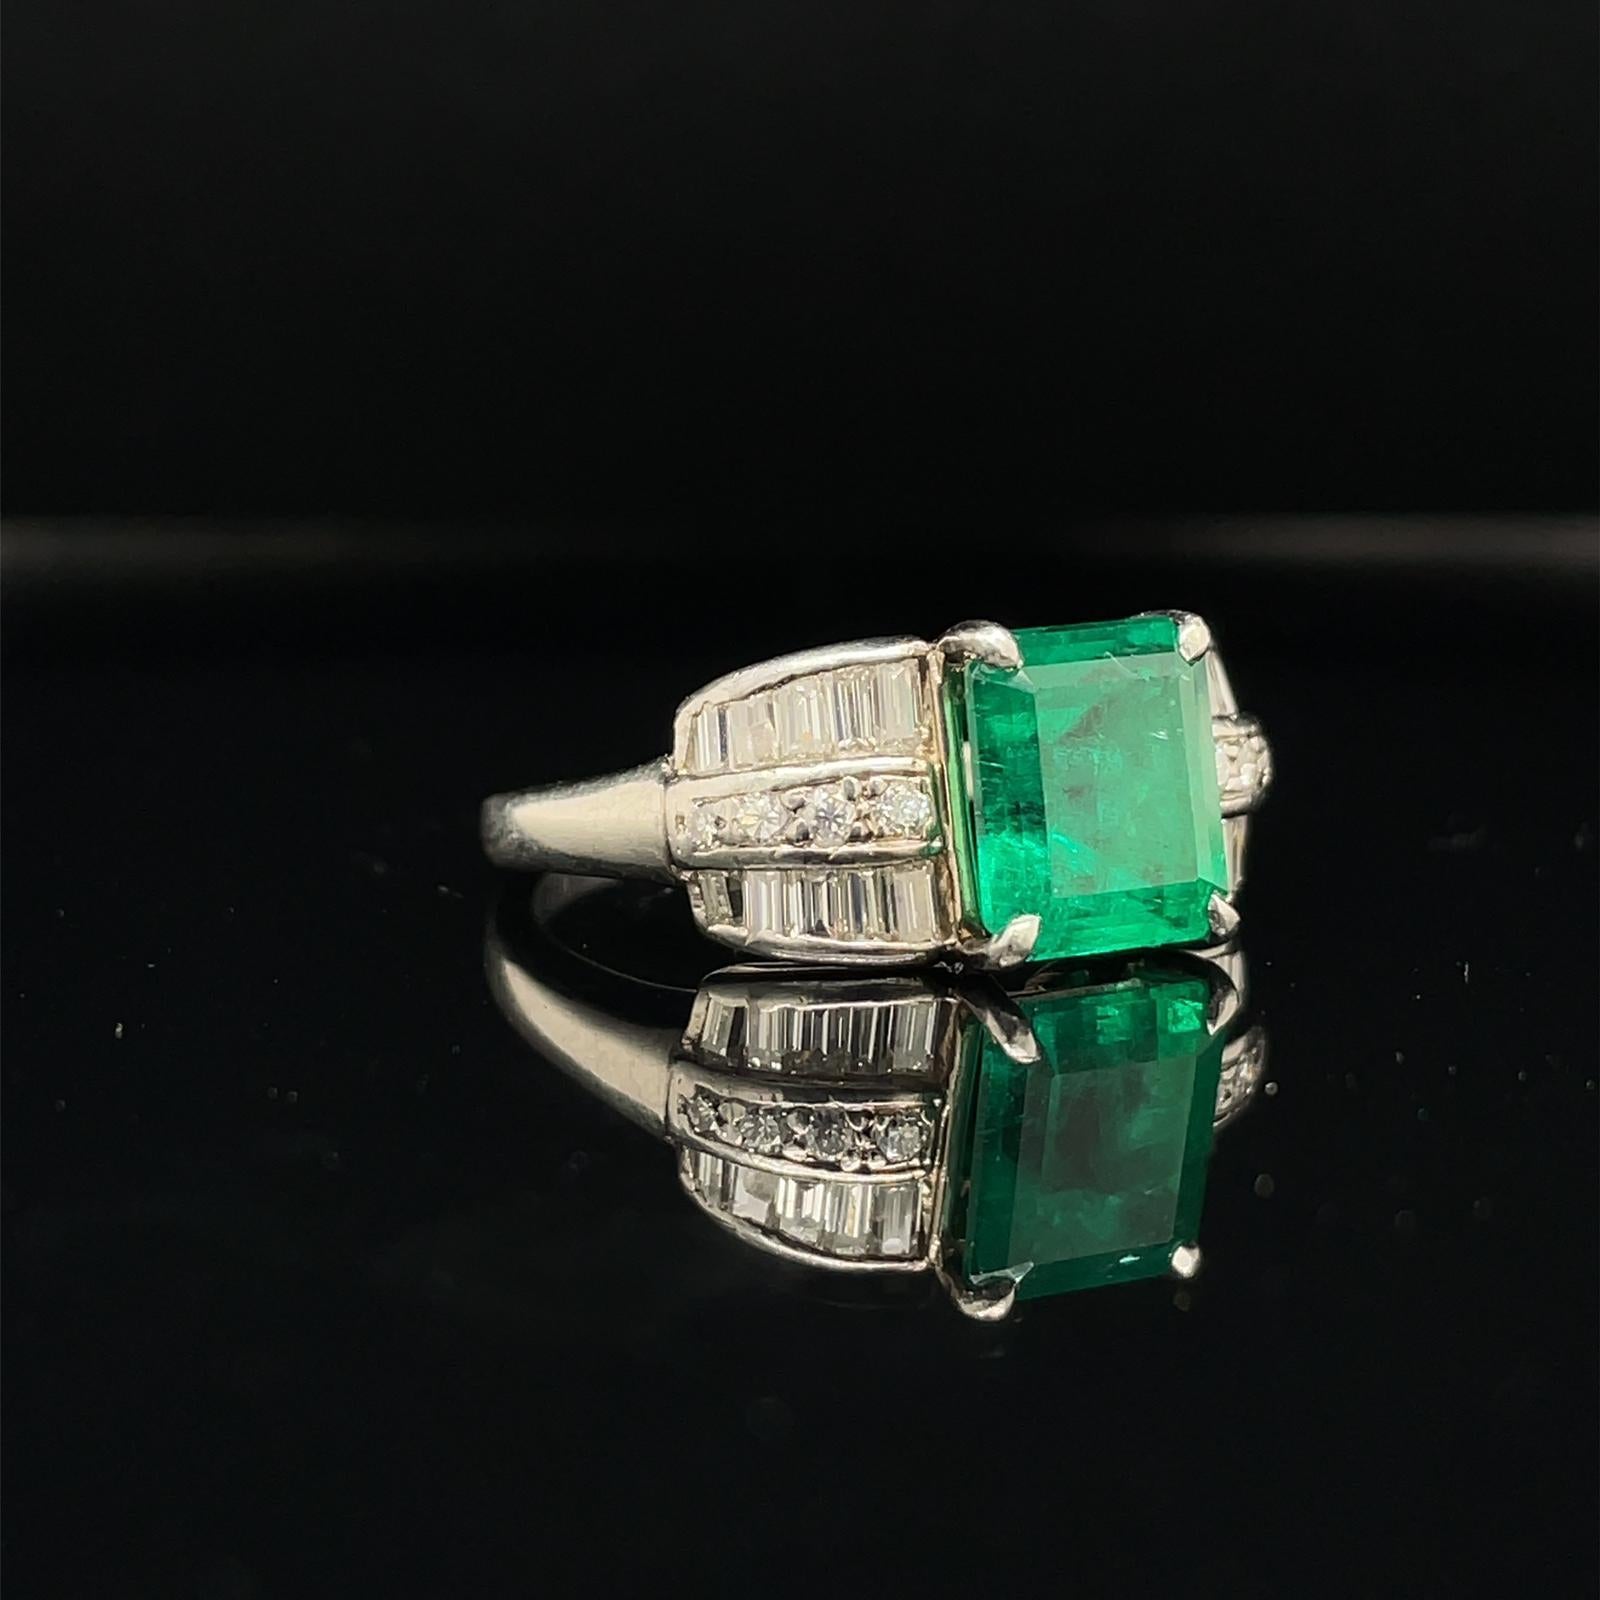 An emerald and diamond platinum engagement ring in an Art Deco style, circa 1950

This ring is centrally set with an beautiful 2.07 carat emerald cut emerald which is claw set in platinum The emerald has an intense and vibrant deep green colour to